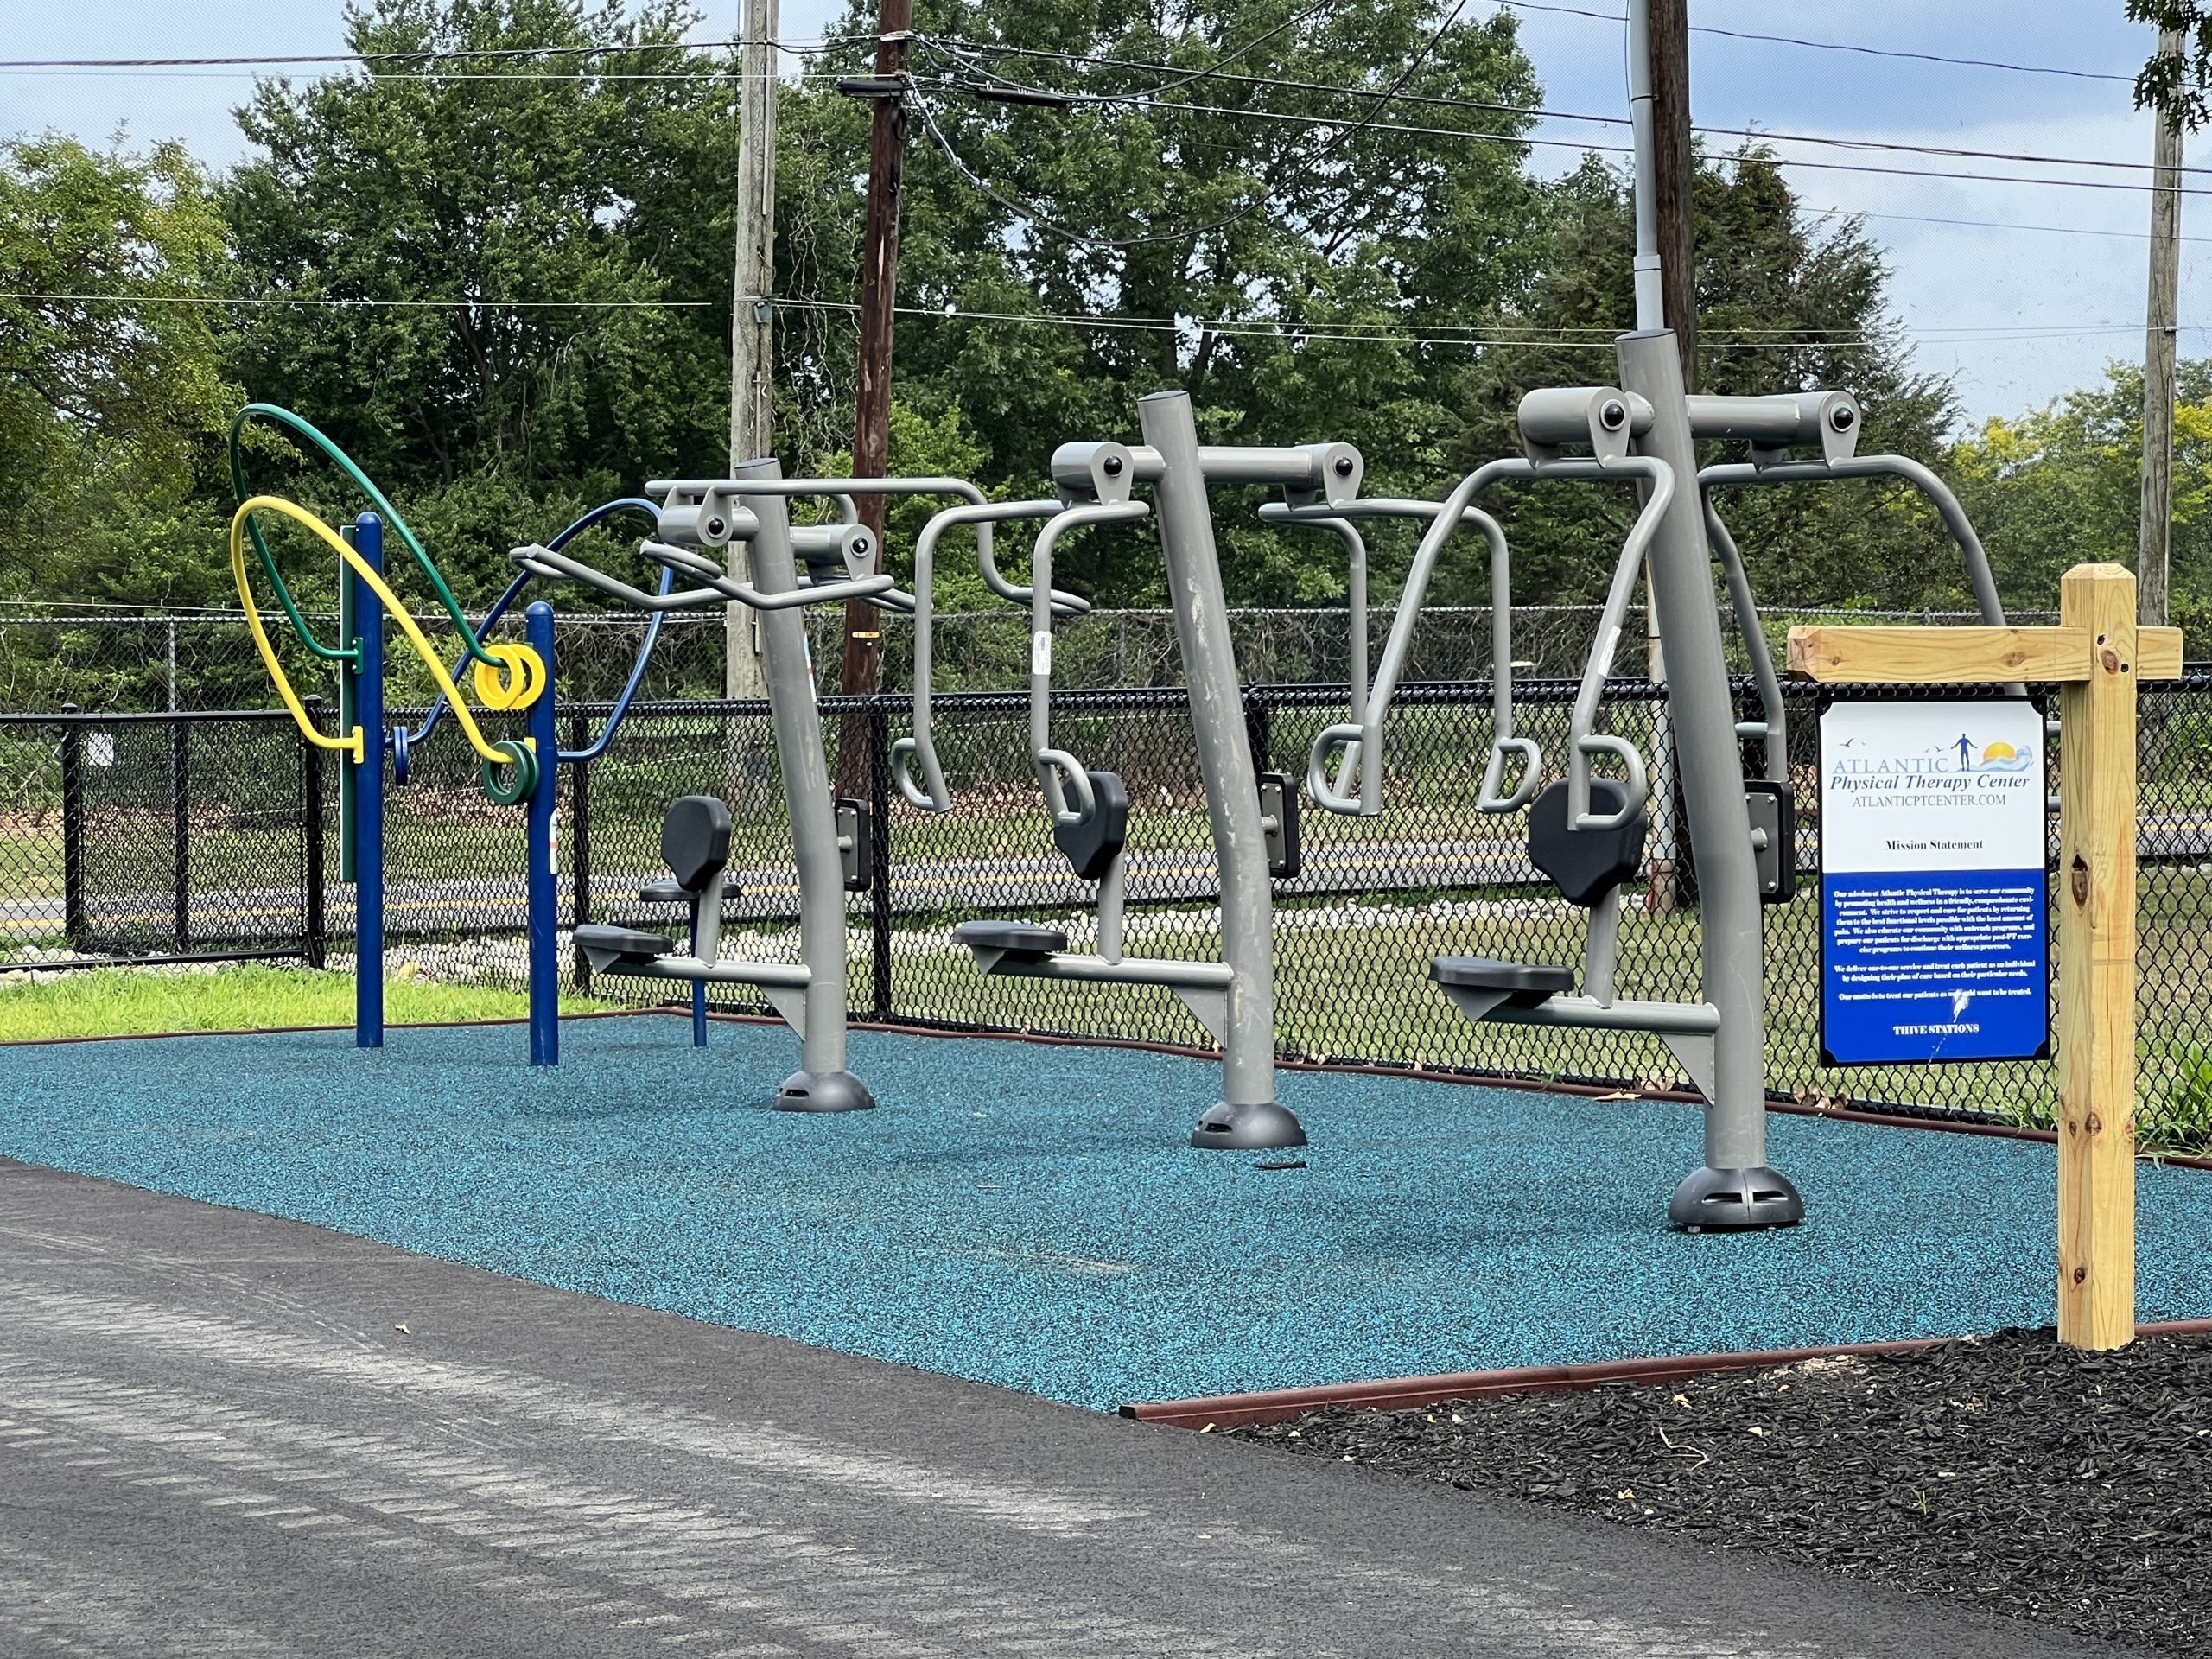 Field of Dreams Playground in Toms River NJ therapy equipment 1